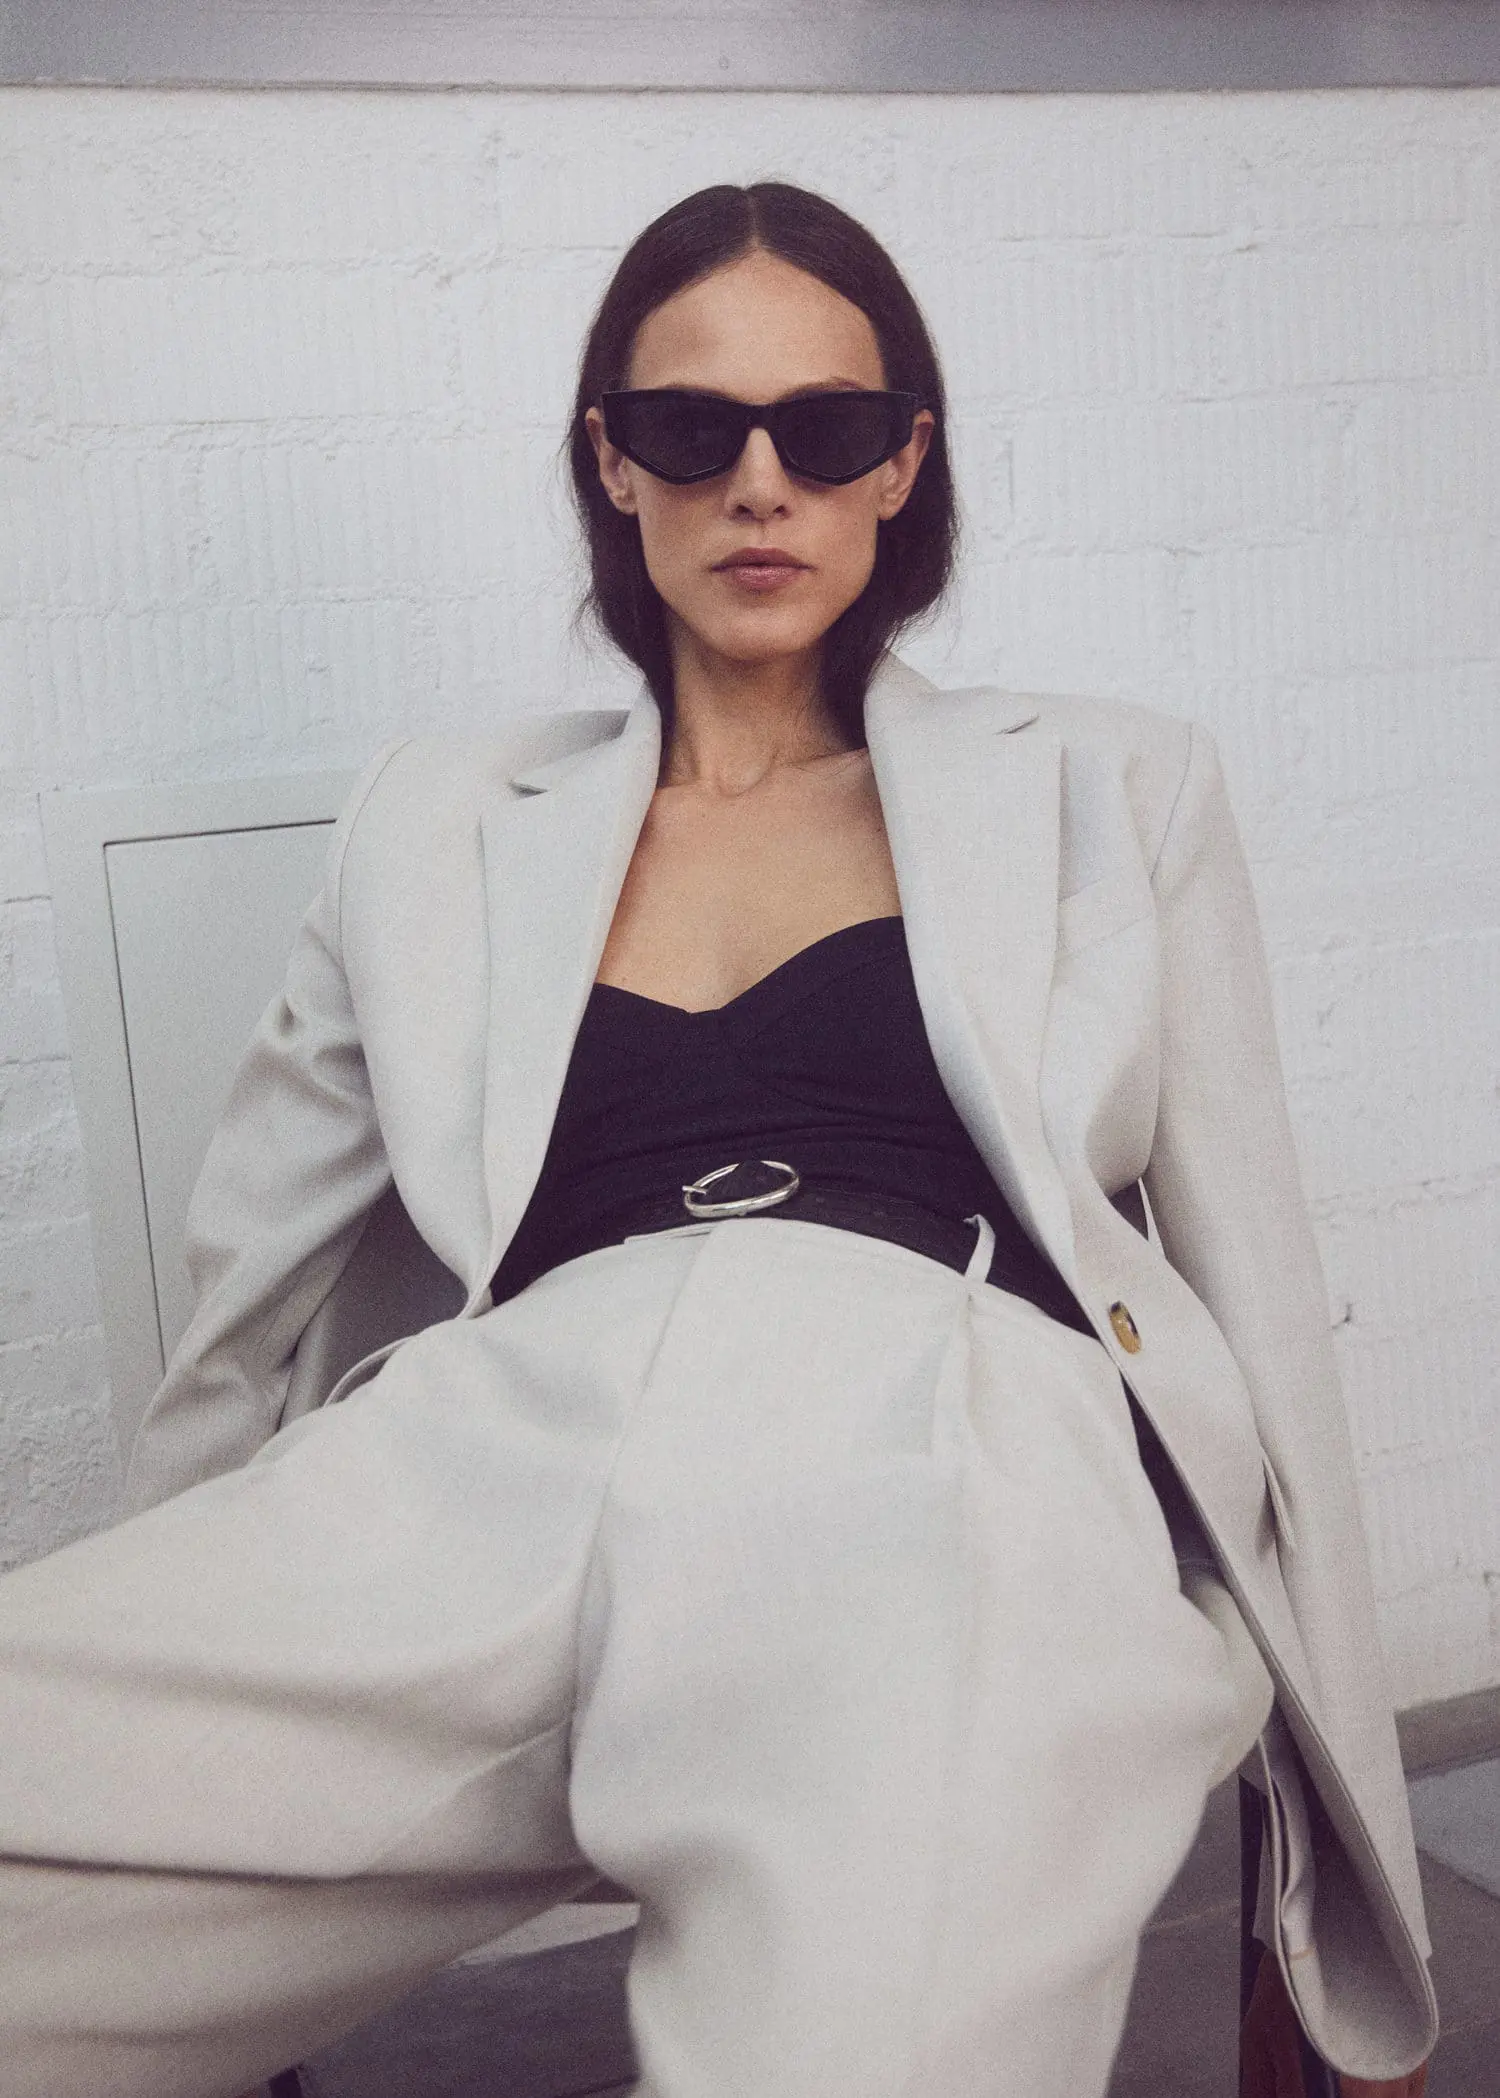 Mango Patterned suit blazer. a woman wearing a white suit and sunglasses. 